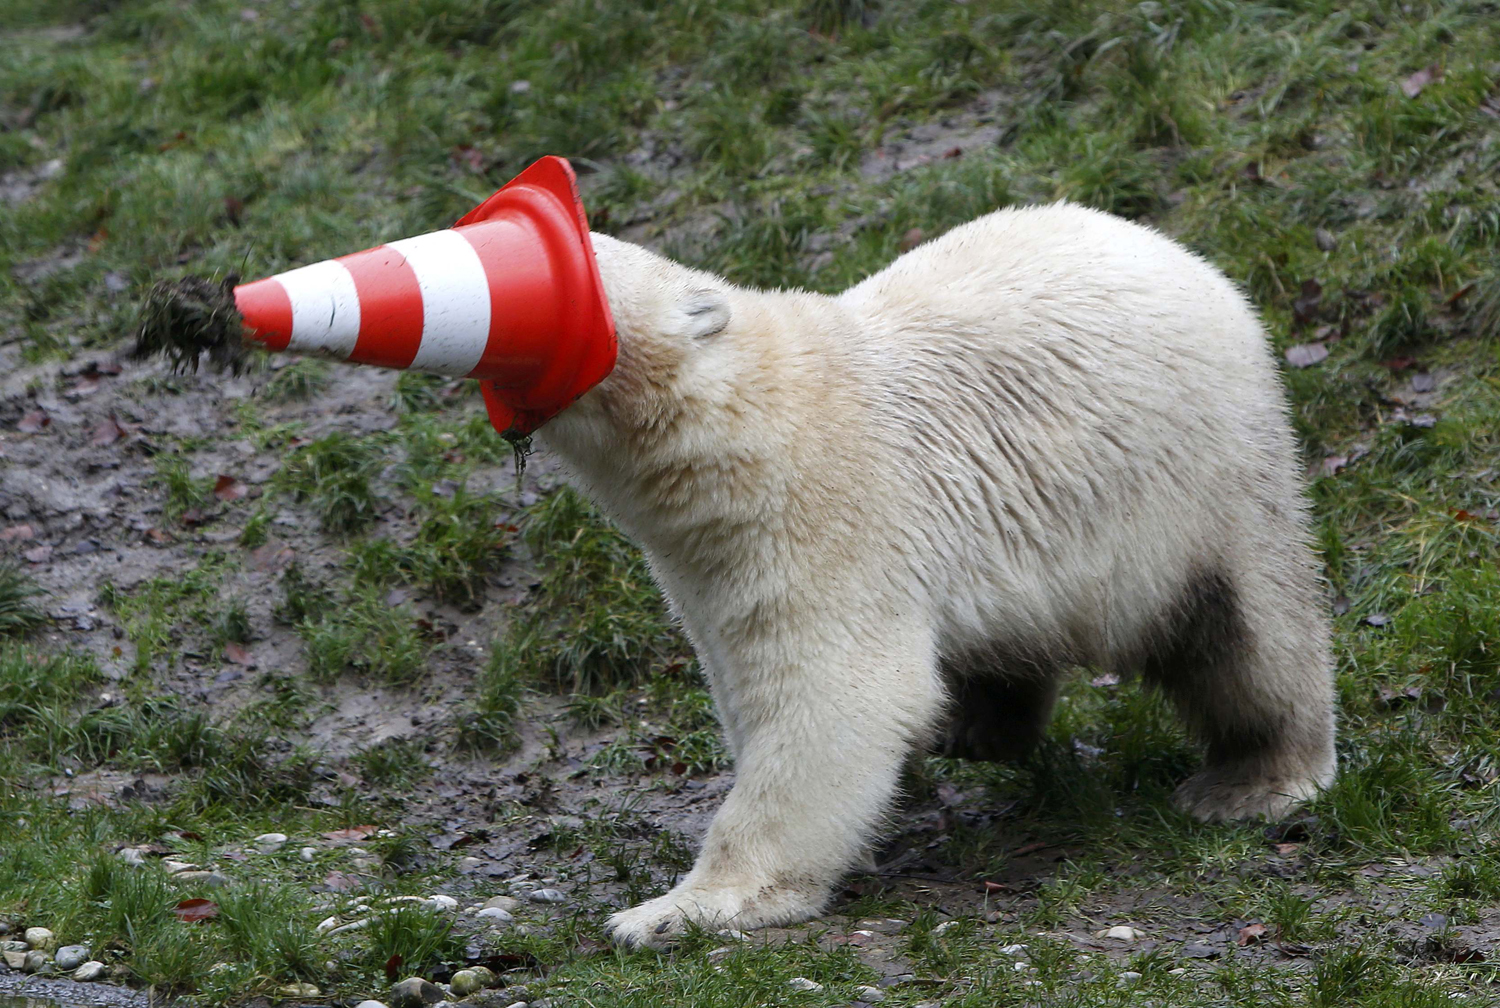 A polar bear plays with a pylon during celebrations marking its first birthday in an enclosure at Tierpark Hellabrunn zoo in Munich, Germany on Dec. 9.